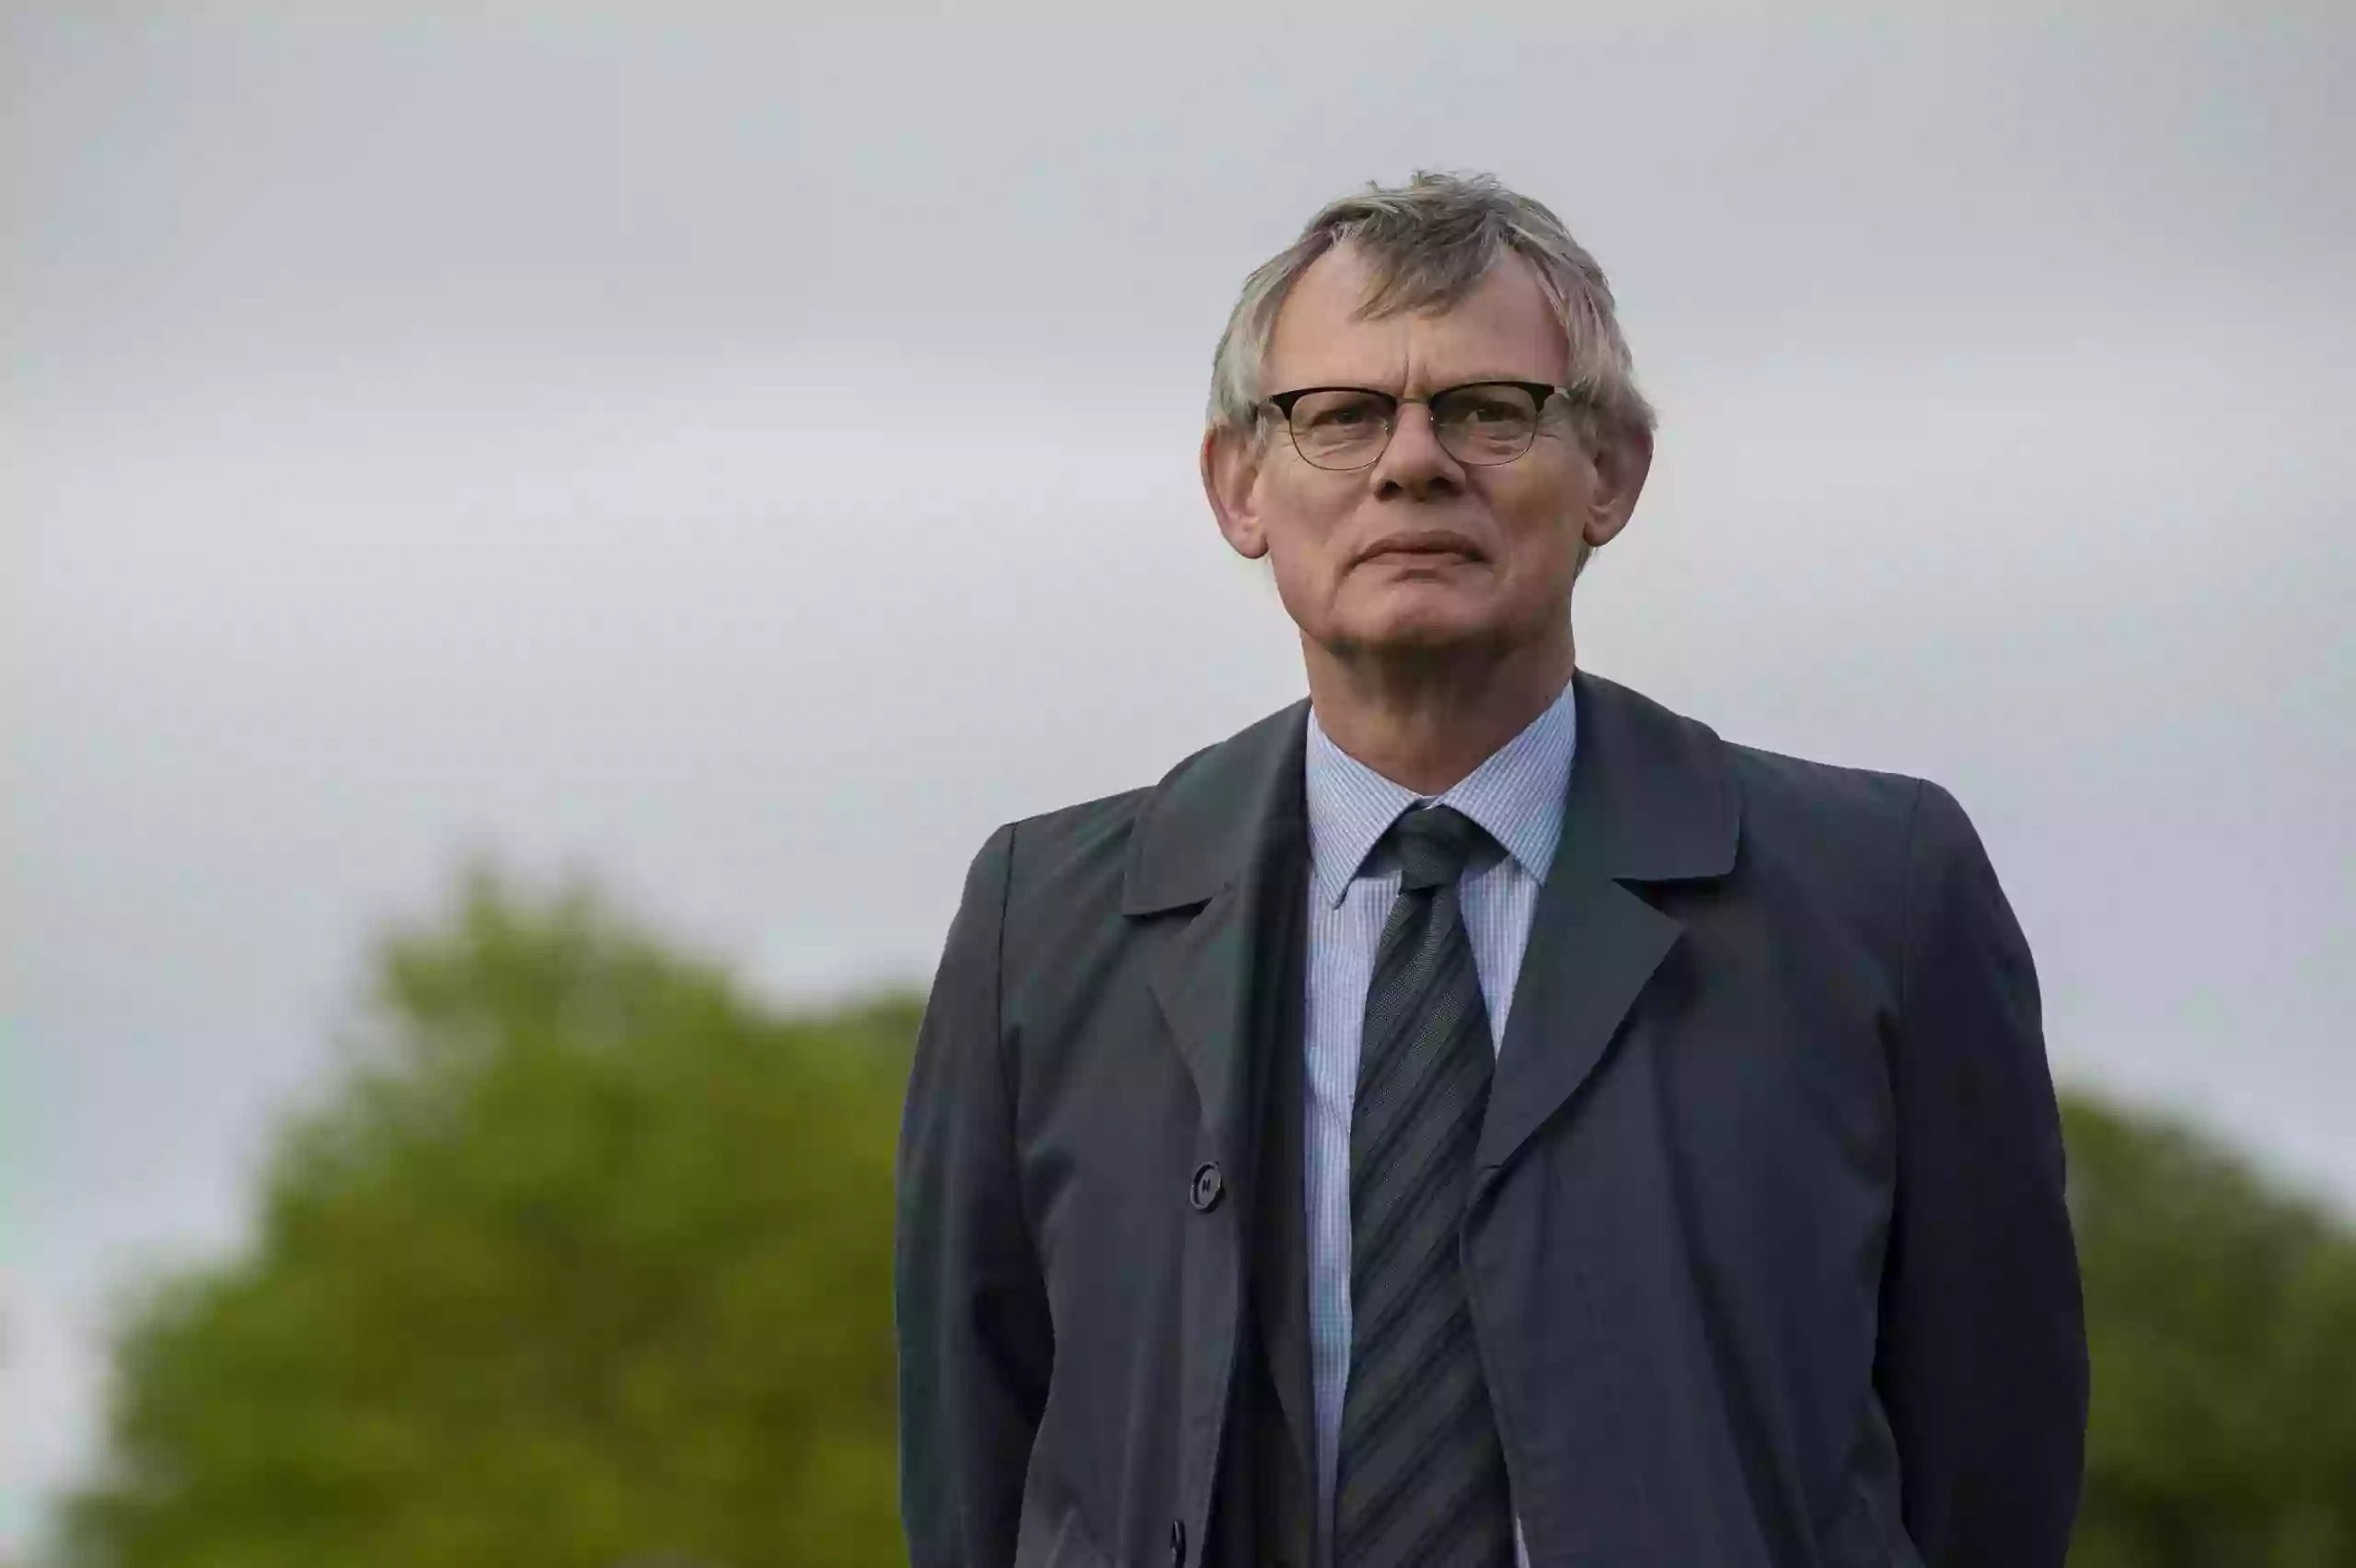 Martin Clunes' Manhunt Series 2 is speculated to come this autumn!